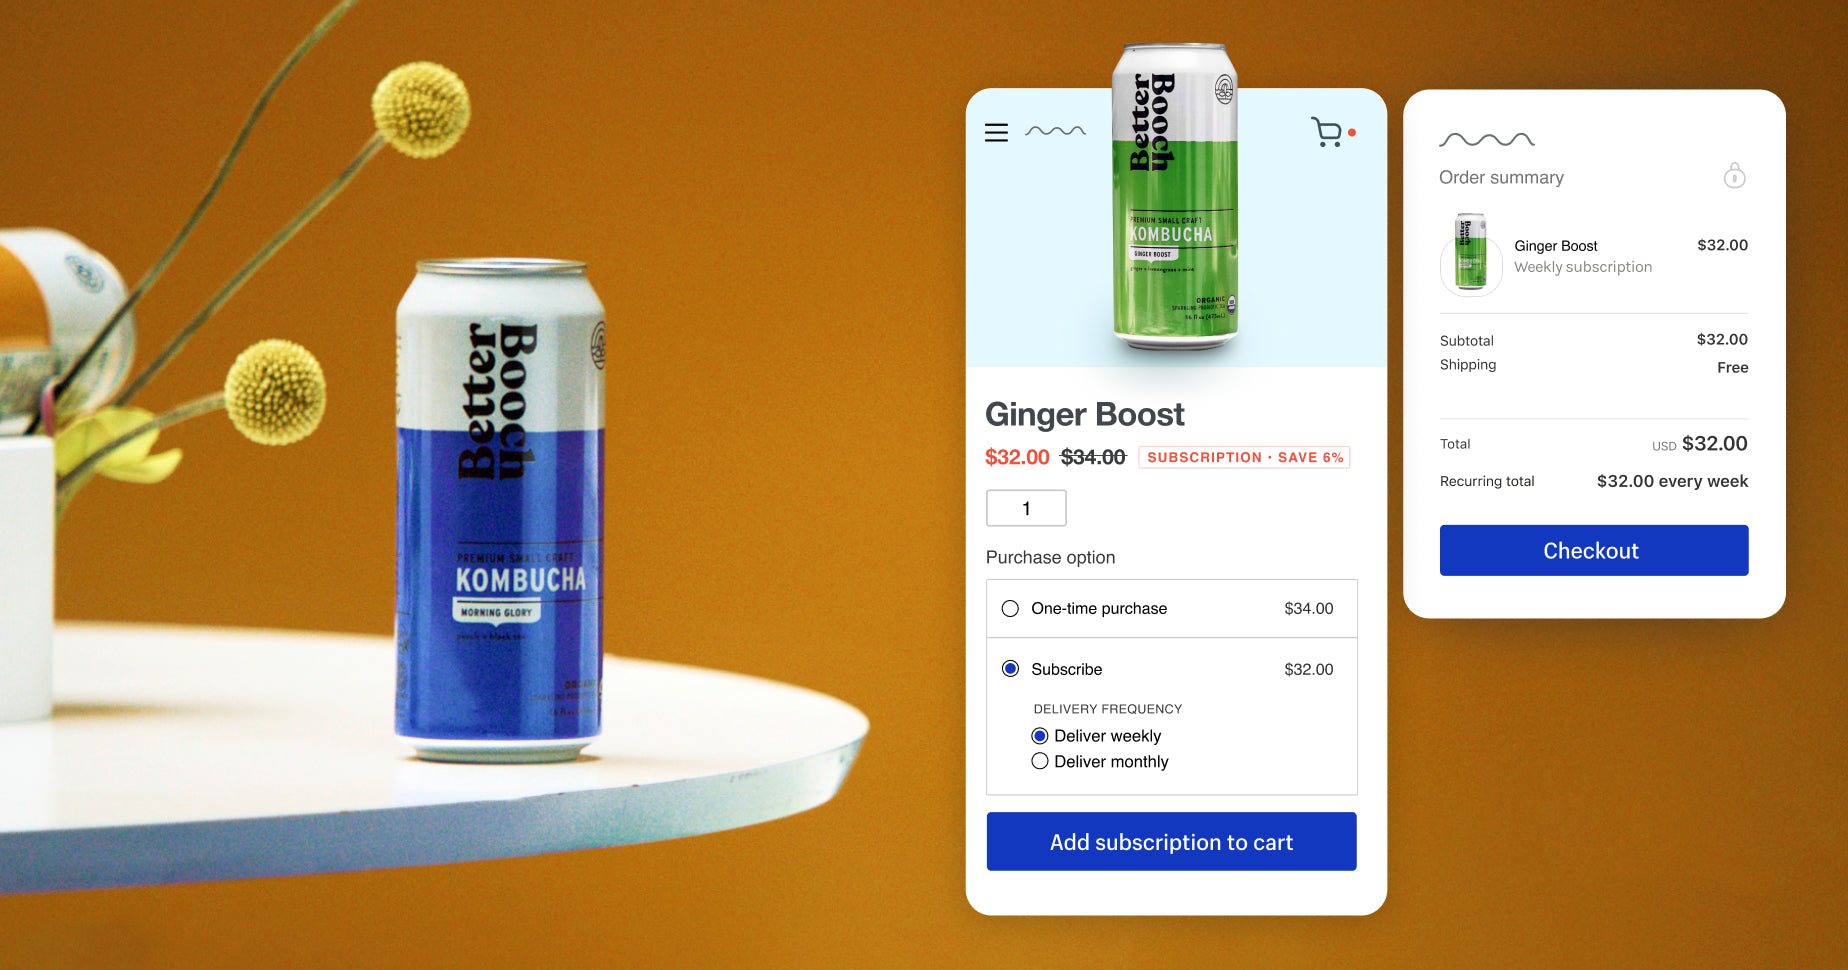 A blue and white can of Better Booch kombucha on a white table next to a product detail page and checkout page on a website.